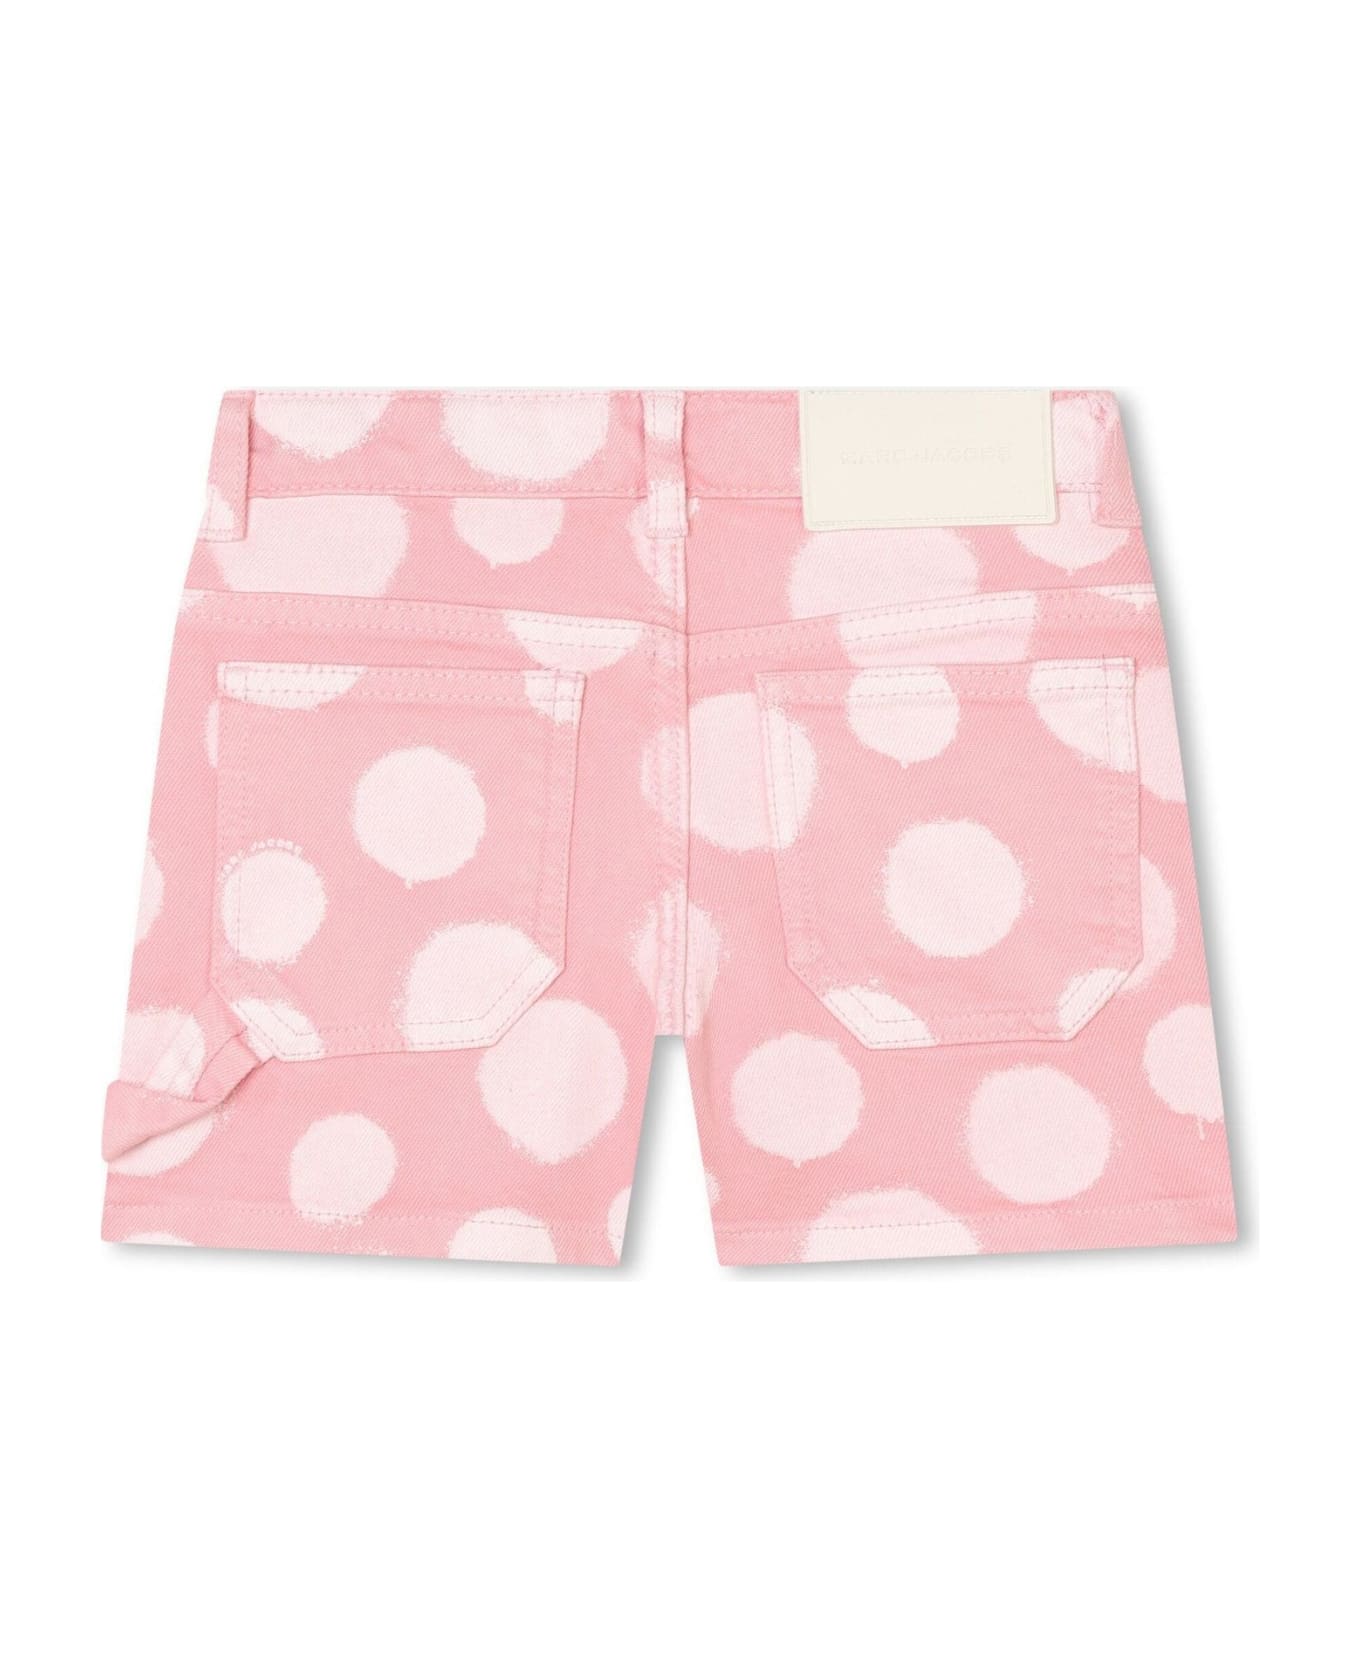 Marc Jacobs Shorts Pink - Pink